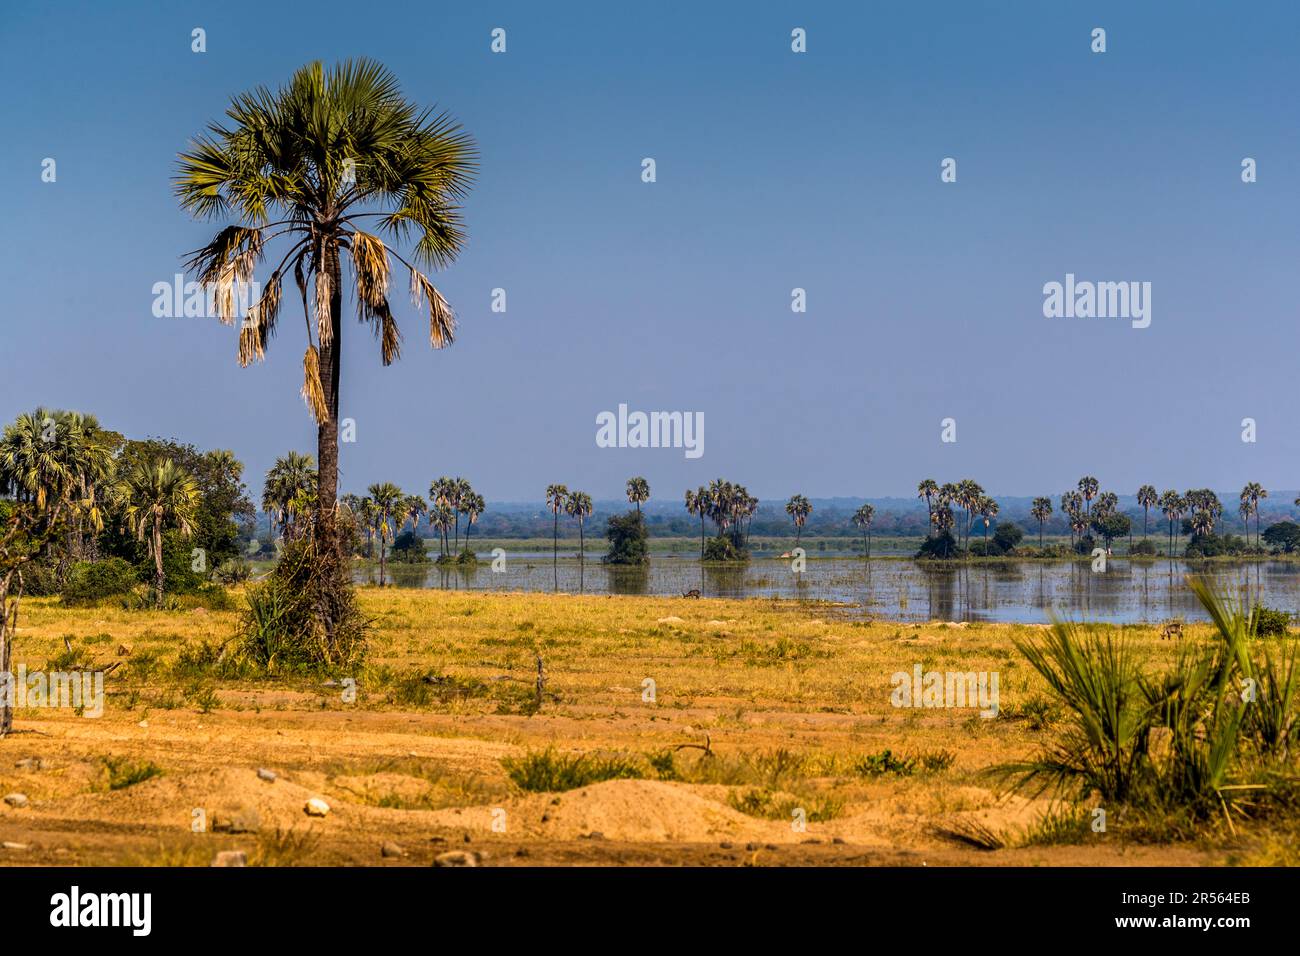 Picturesque landscape in Liwonde National Park, bordering the Shire River on one side. Heavy rains have submerged the palm trees in the riparian area. Palm trees on the bank of the flooded Shire River. Liwonde National Park, Malawi Stock Photo